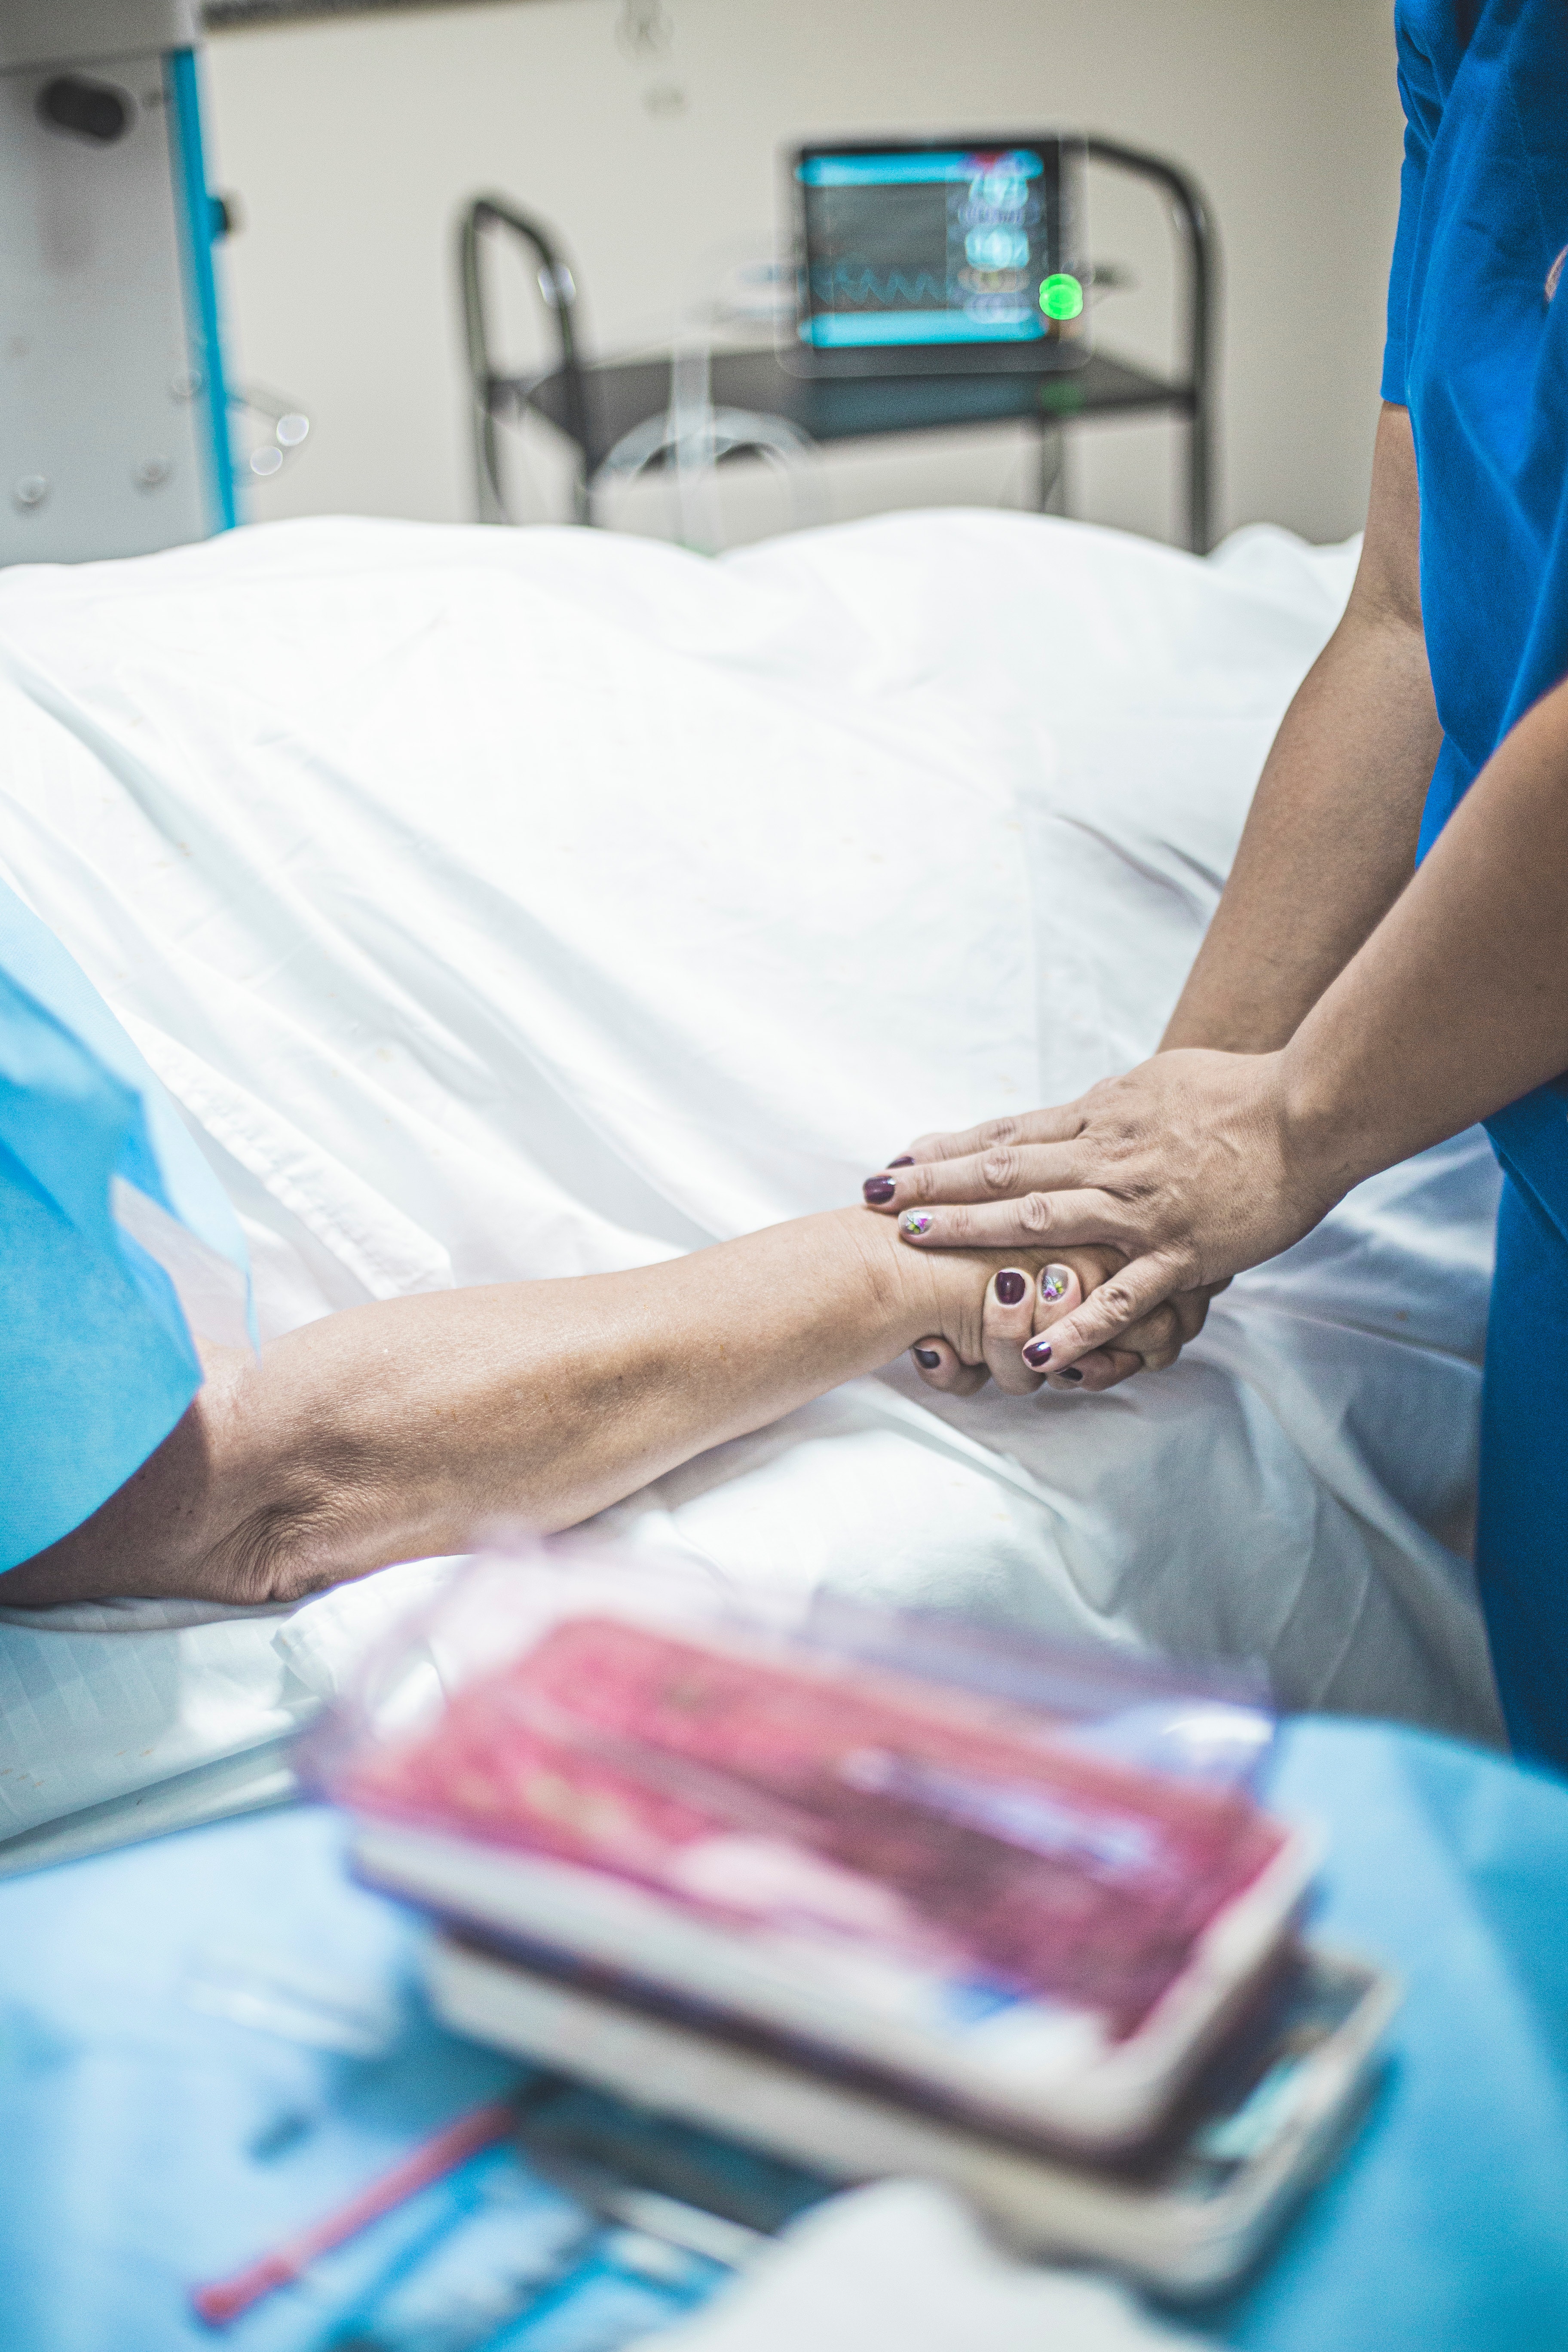 Person in blue scrubs holding the hand of a patient lying on bed | Source: Pexels